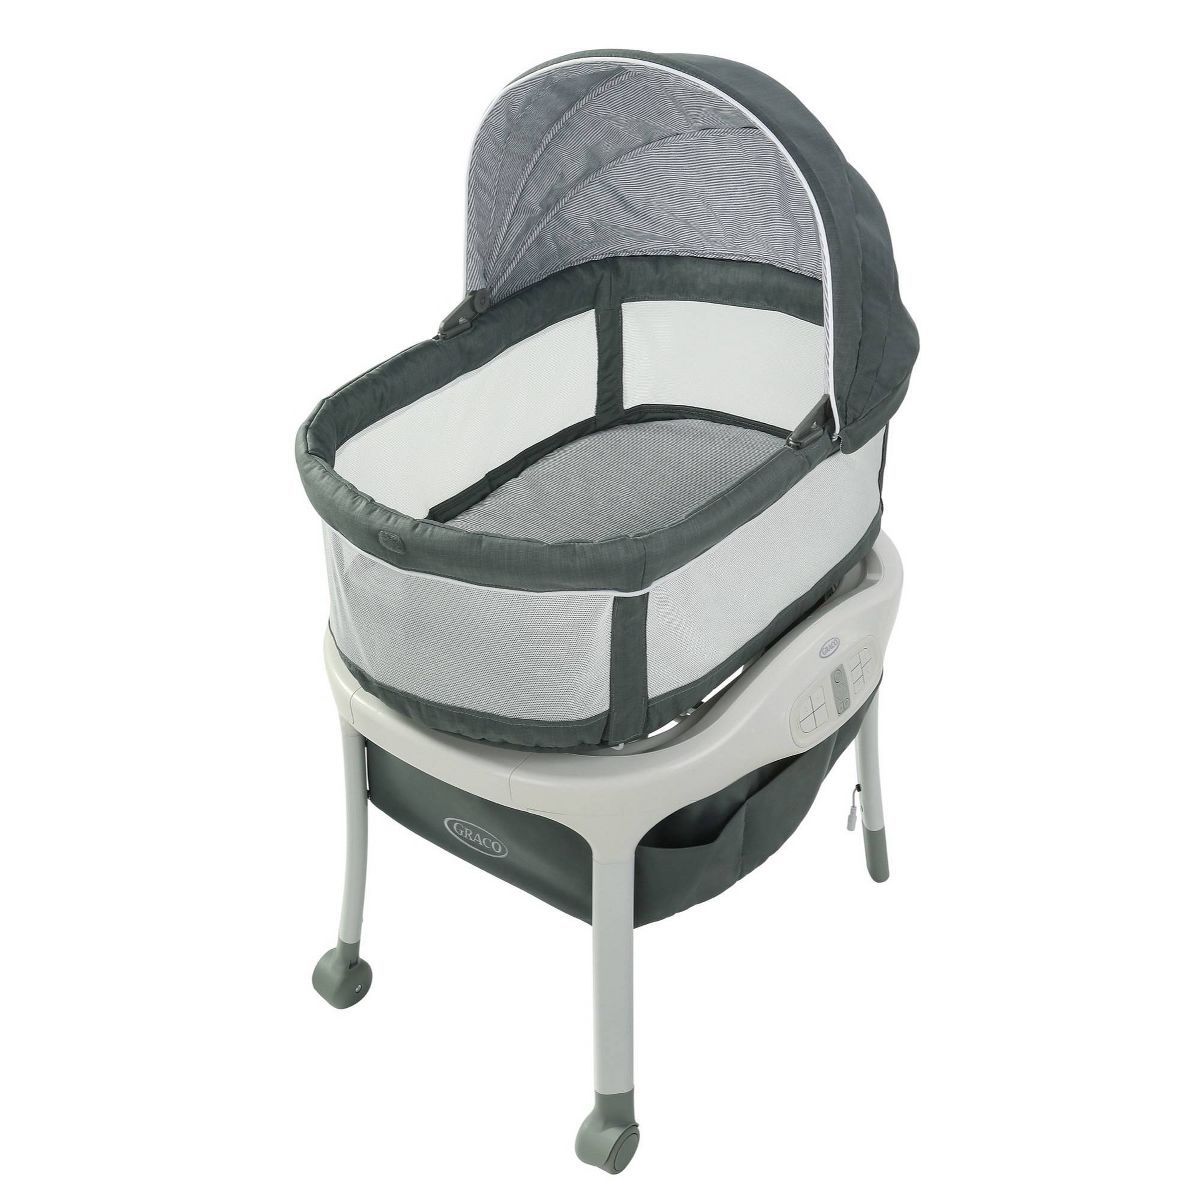 Graco Sense2Snooze Bassinet with Cry Detection Technology - Ellison | Target